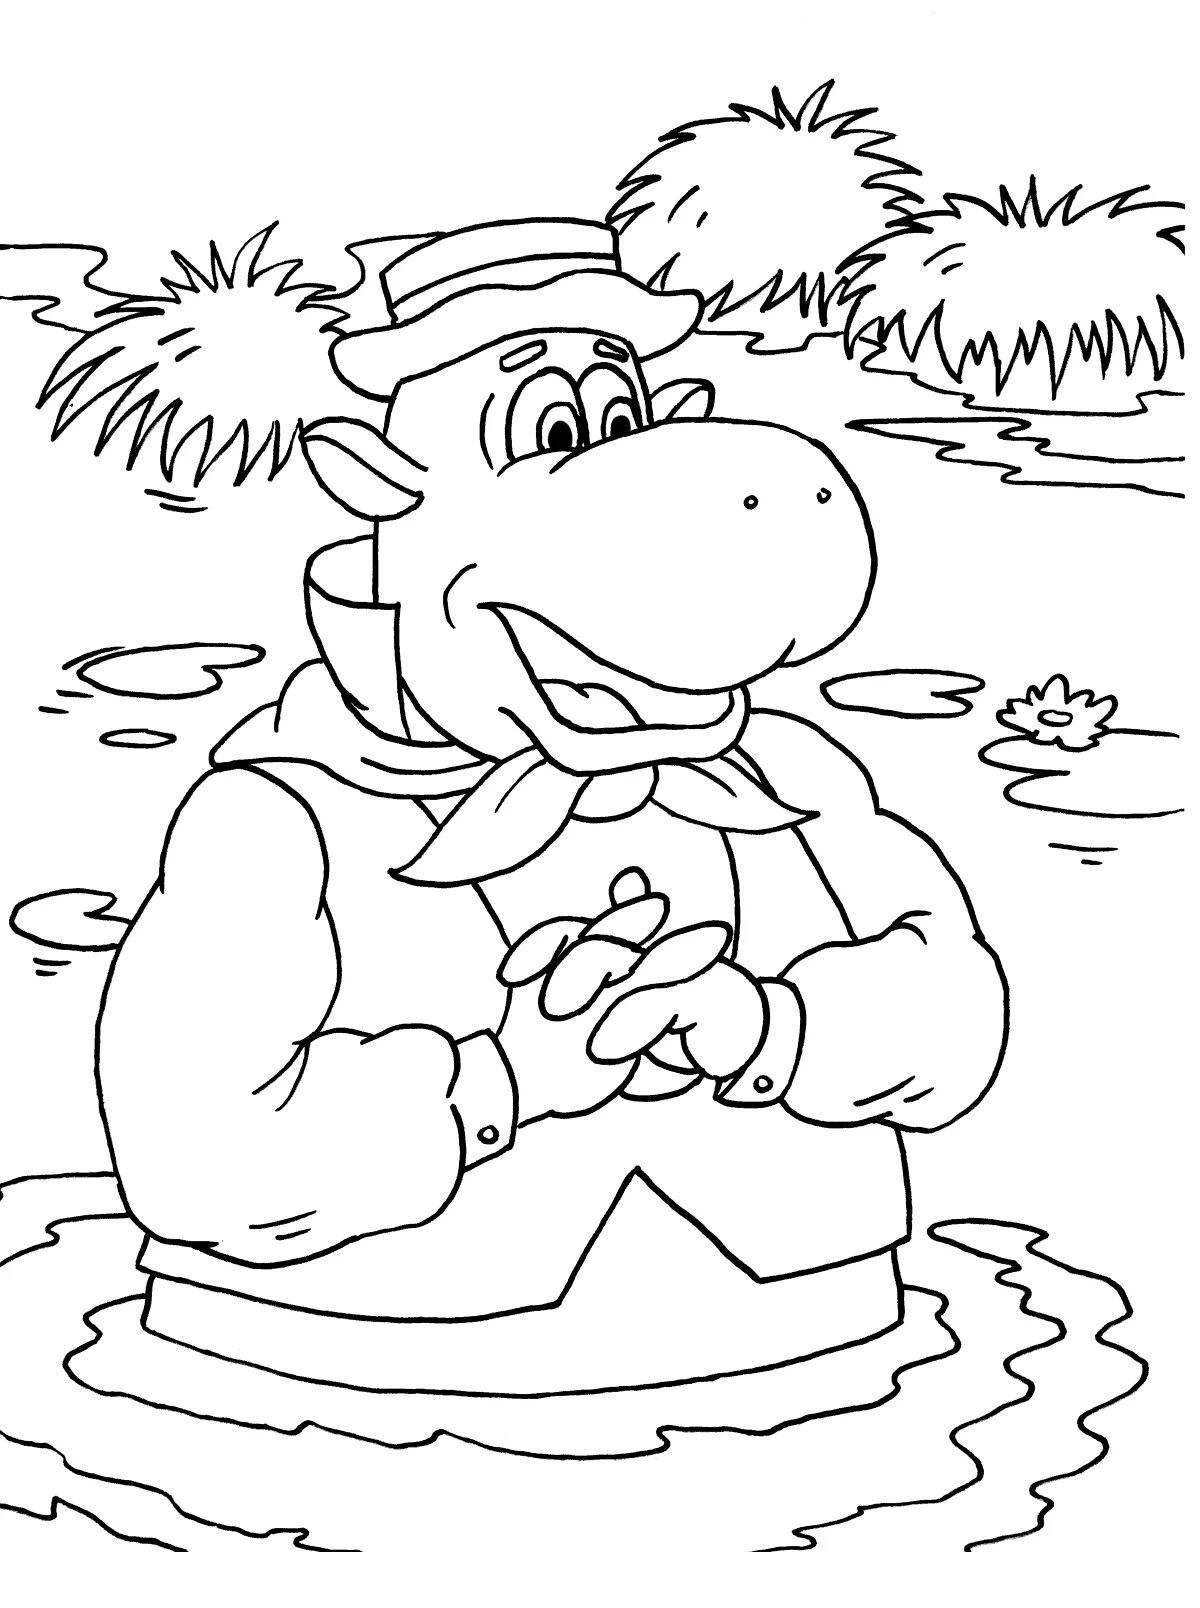 Funny funky uncle mokus coloring page